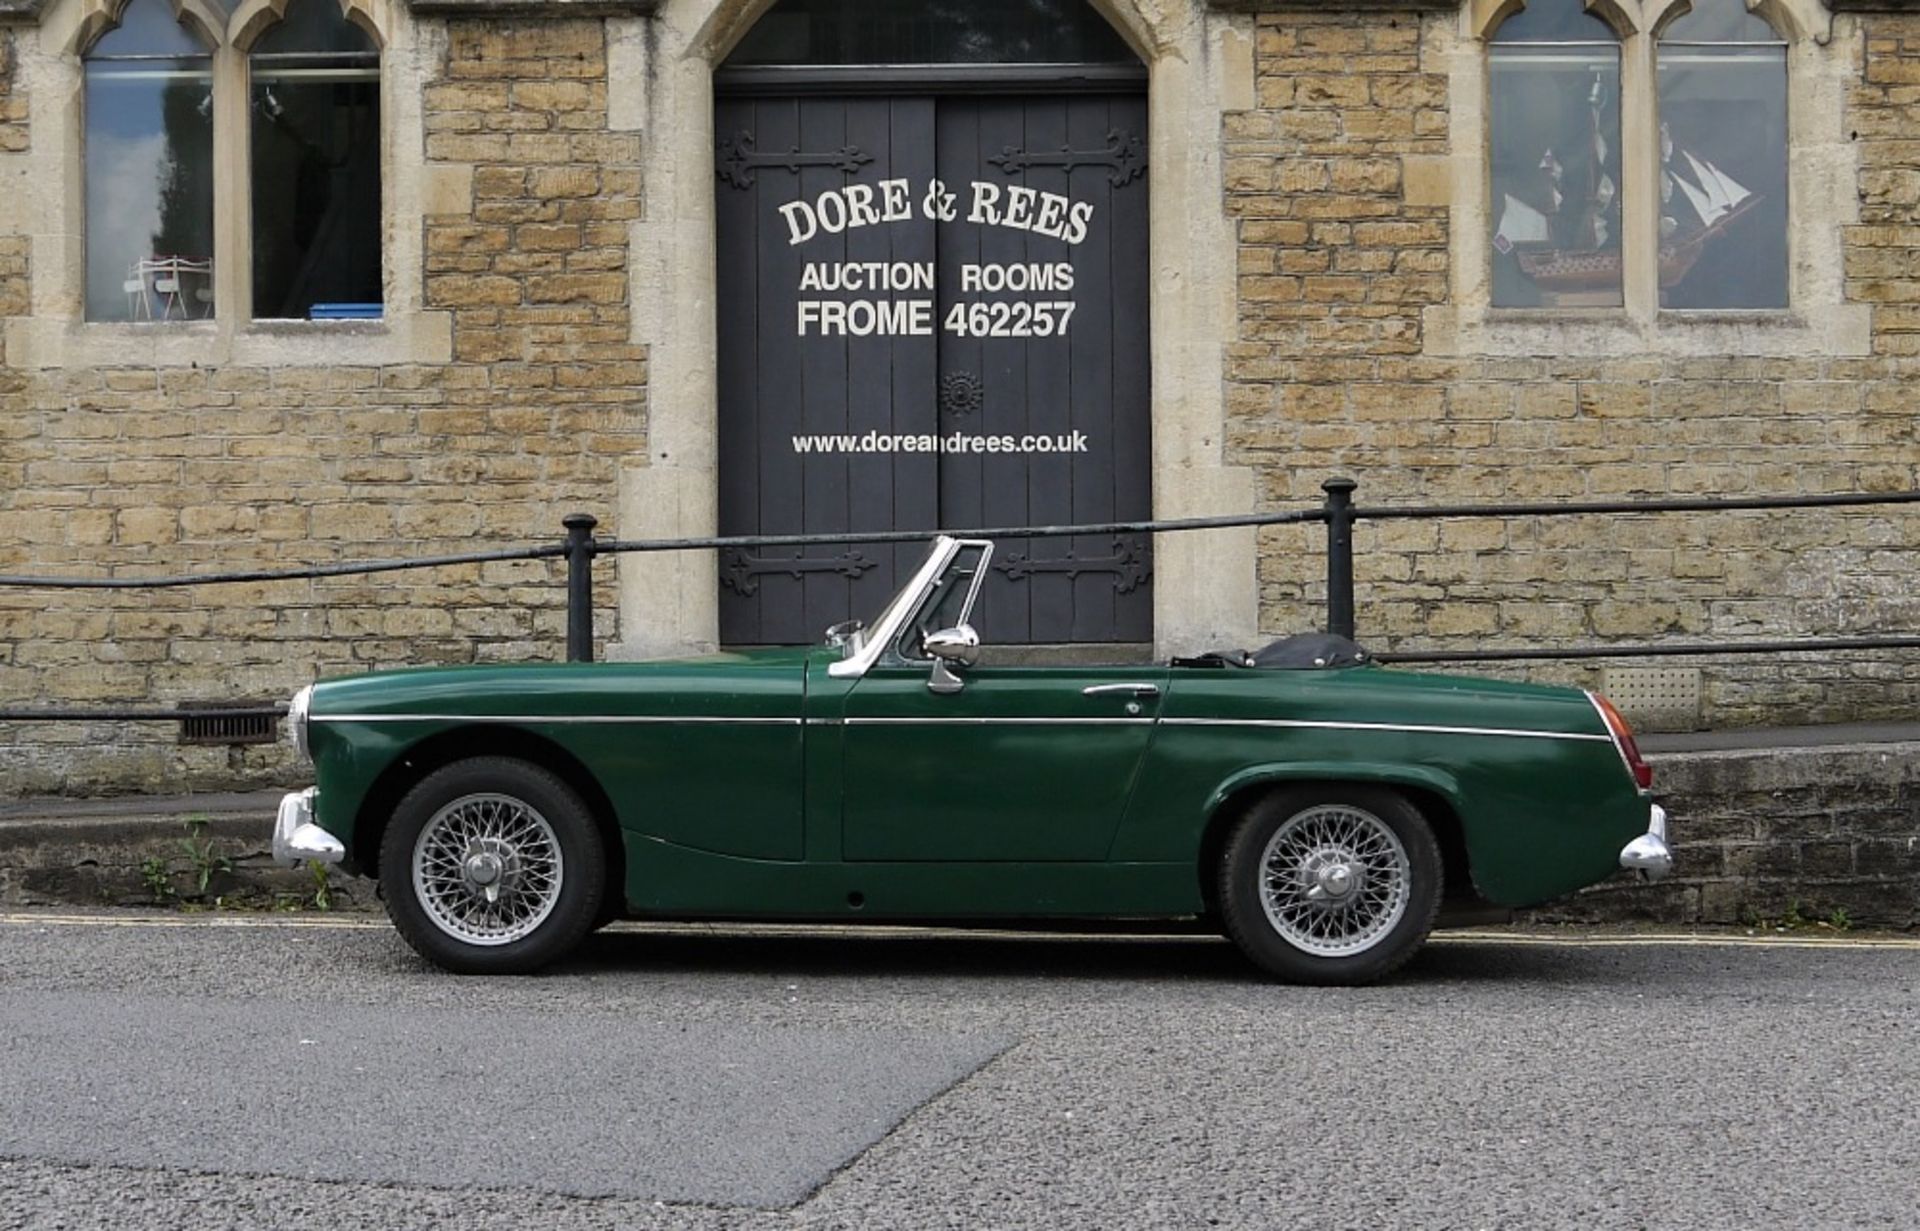 1968 MG MIDGET MARK III Registration Number: VHV 707G Chassis Number: G-AN4/67396-G Recorded